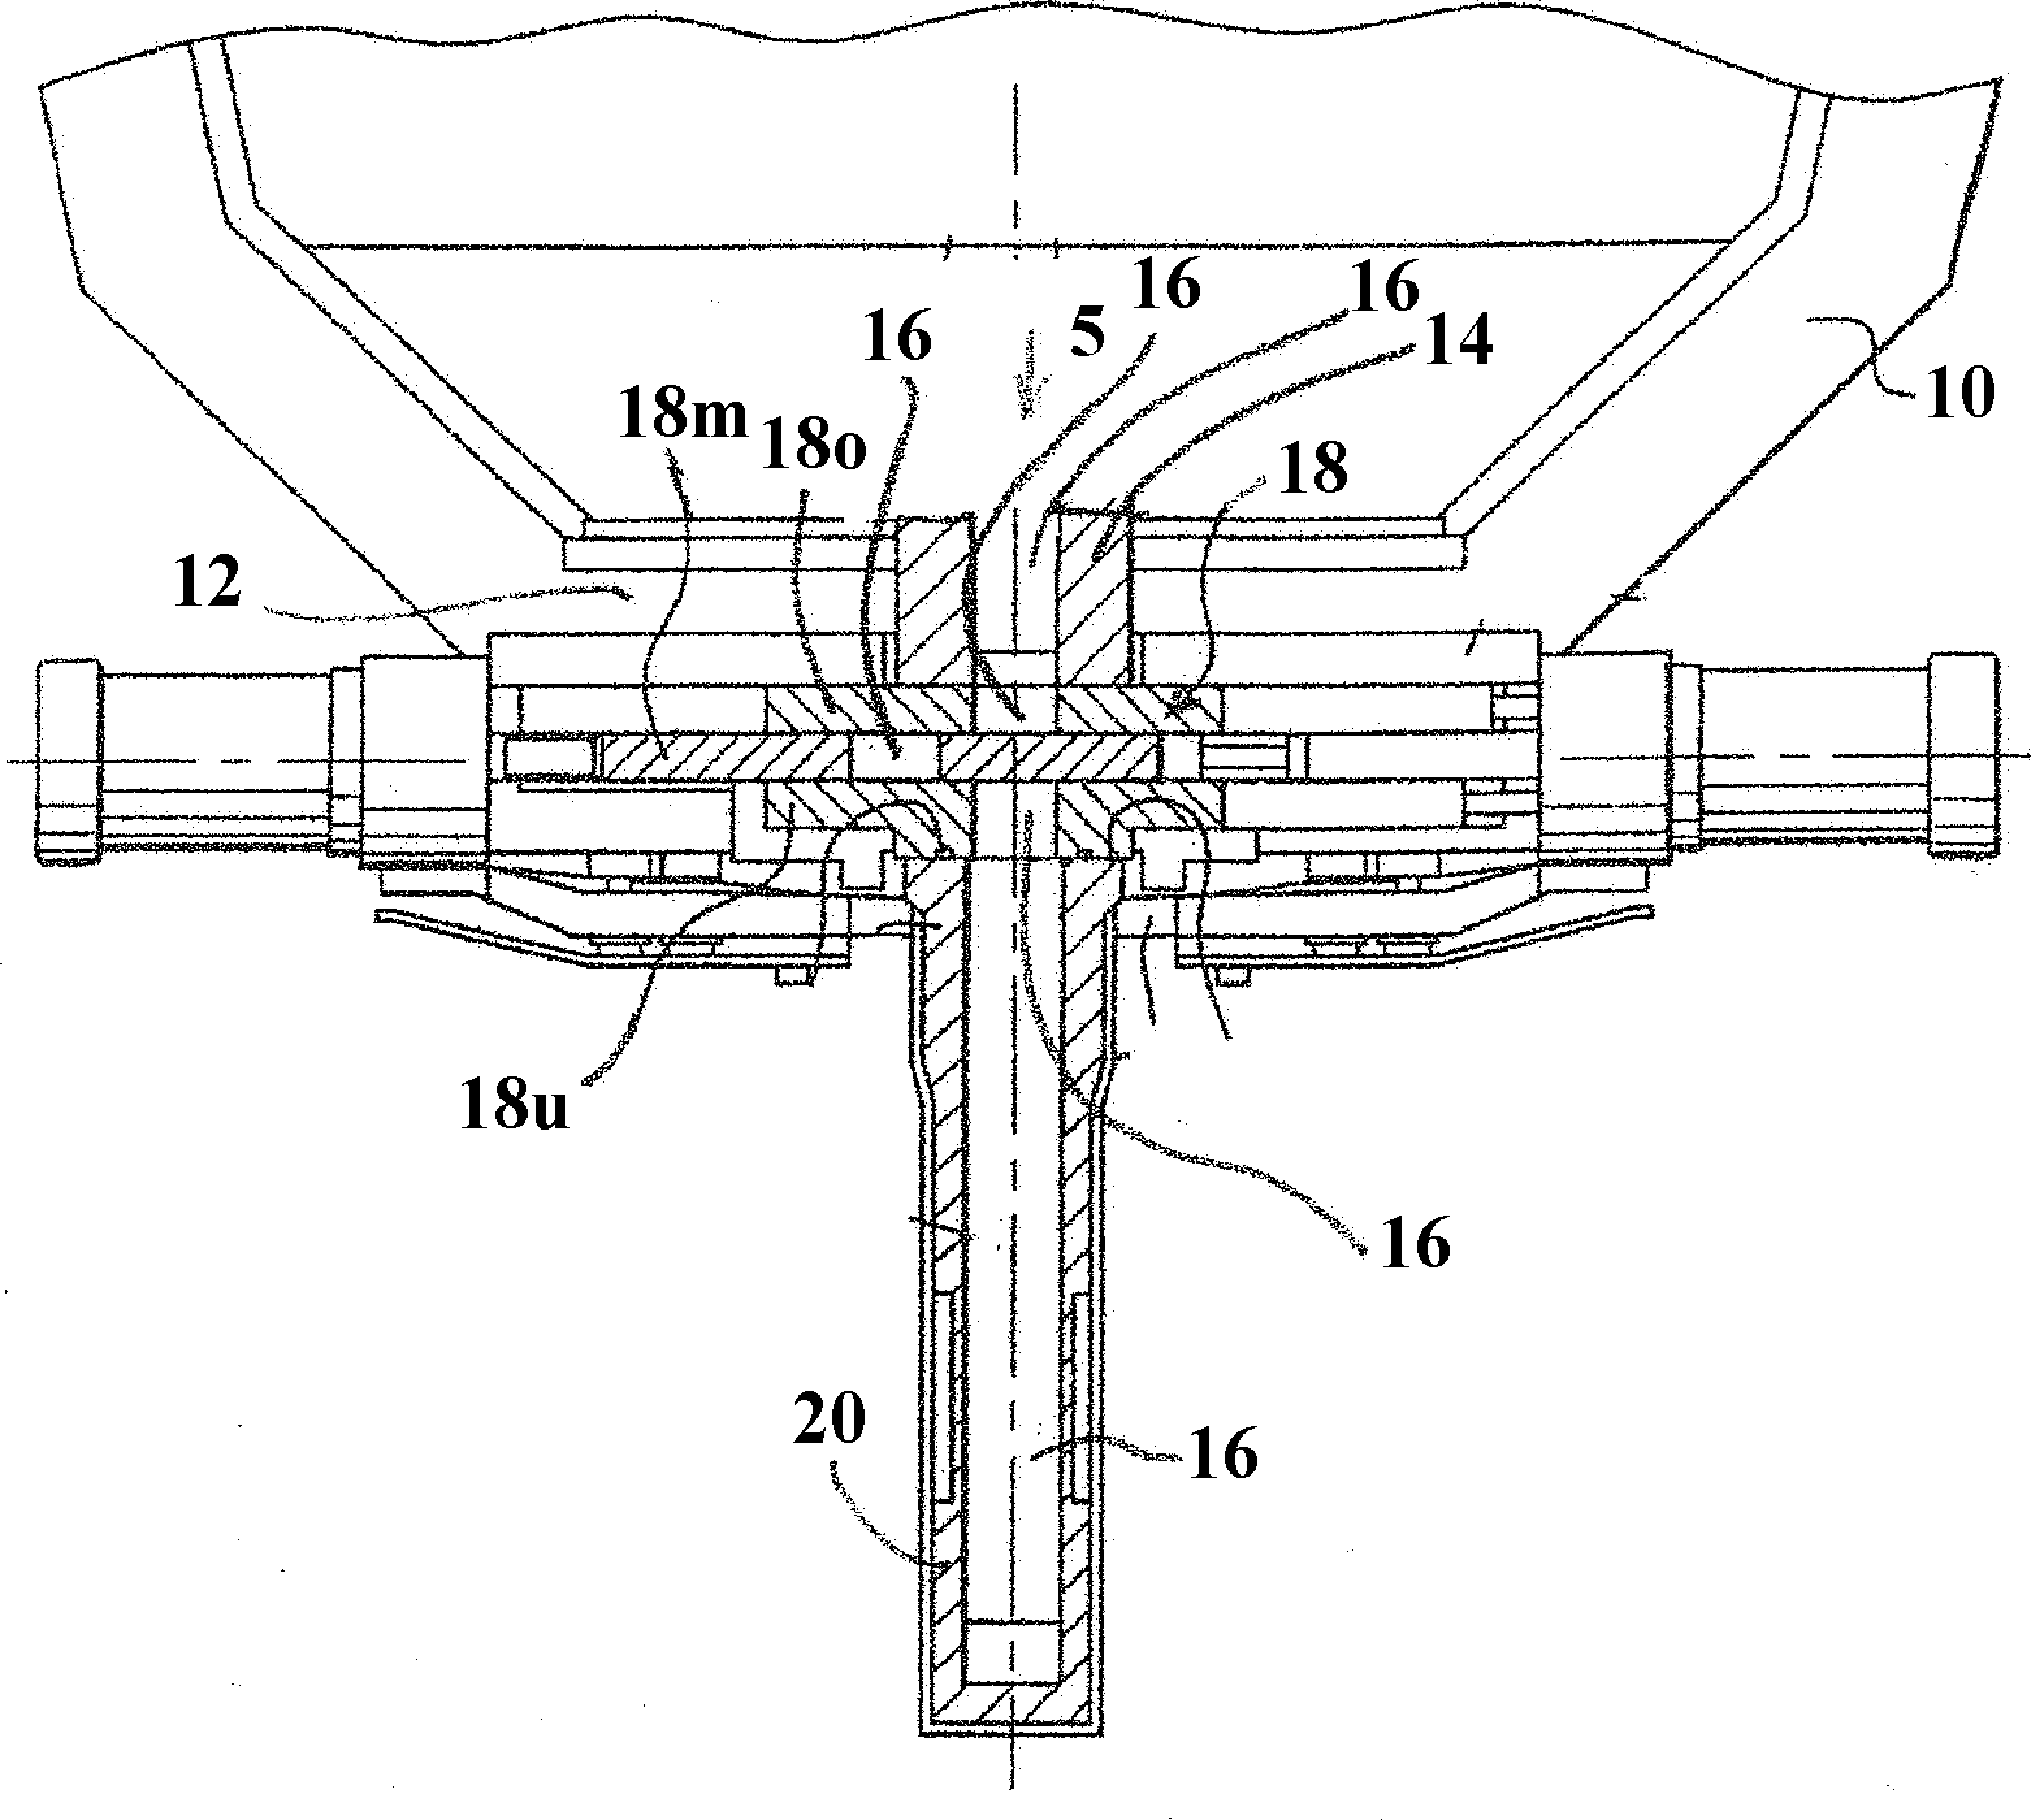 Apparatus for detecting and measuring cylindrical surfaces on fireproof ceramic components in metallurigal applications